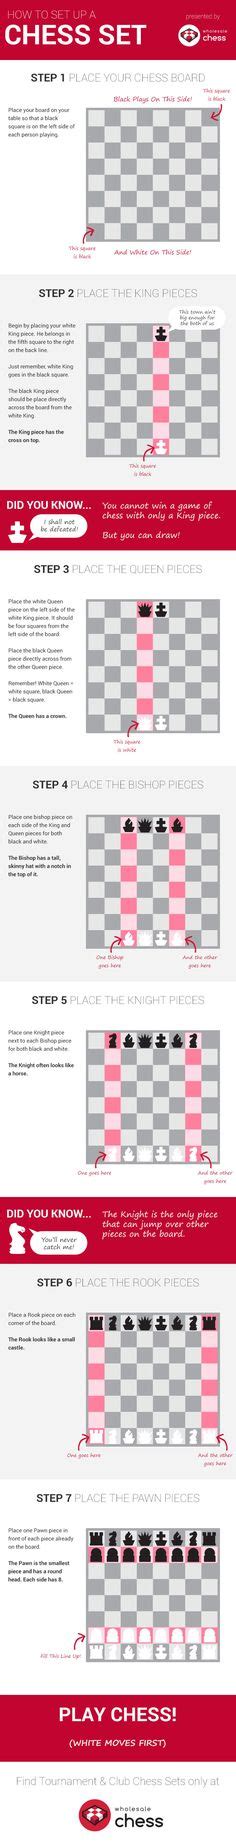 Set up the chess board learn to move the pieces discover the special rules learn who makes the first move check out the rules on how to win study the basic. Chess Notation Printable for Young Chess Players- Great for kids who are new writers! | *Super ...